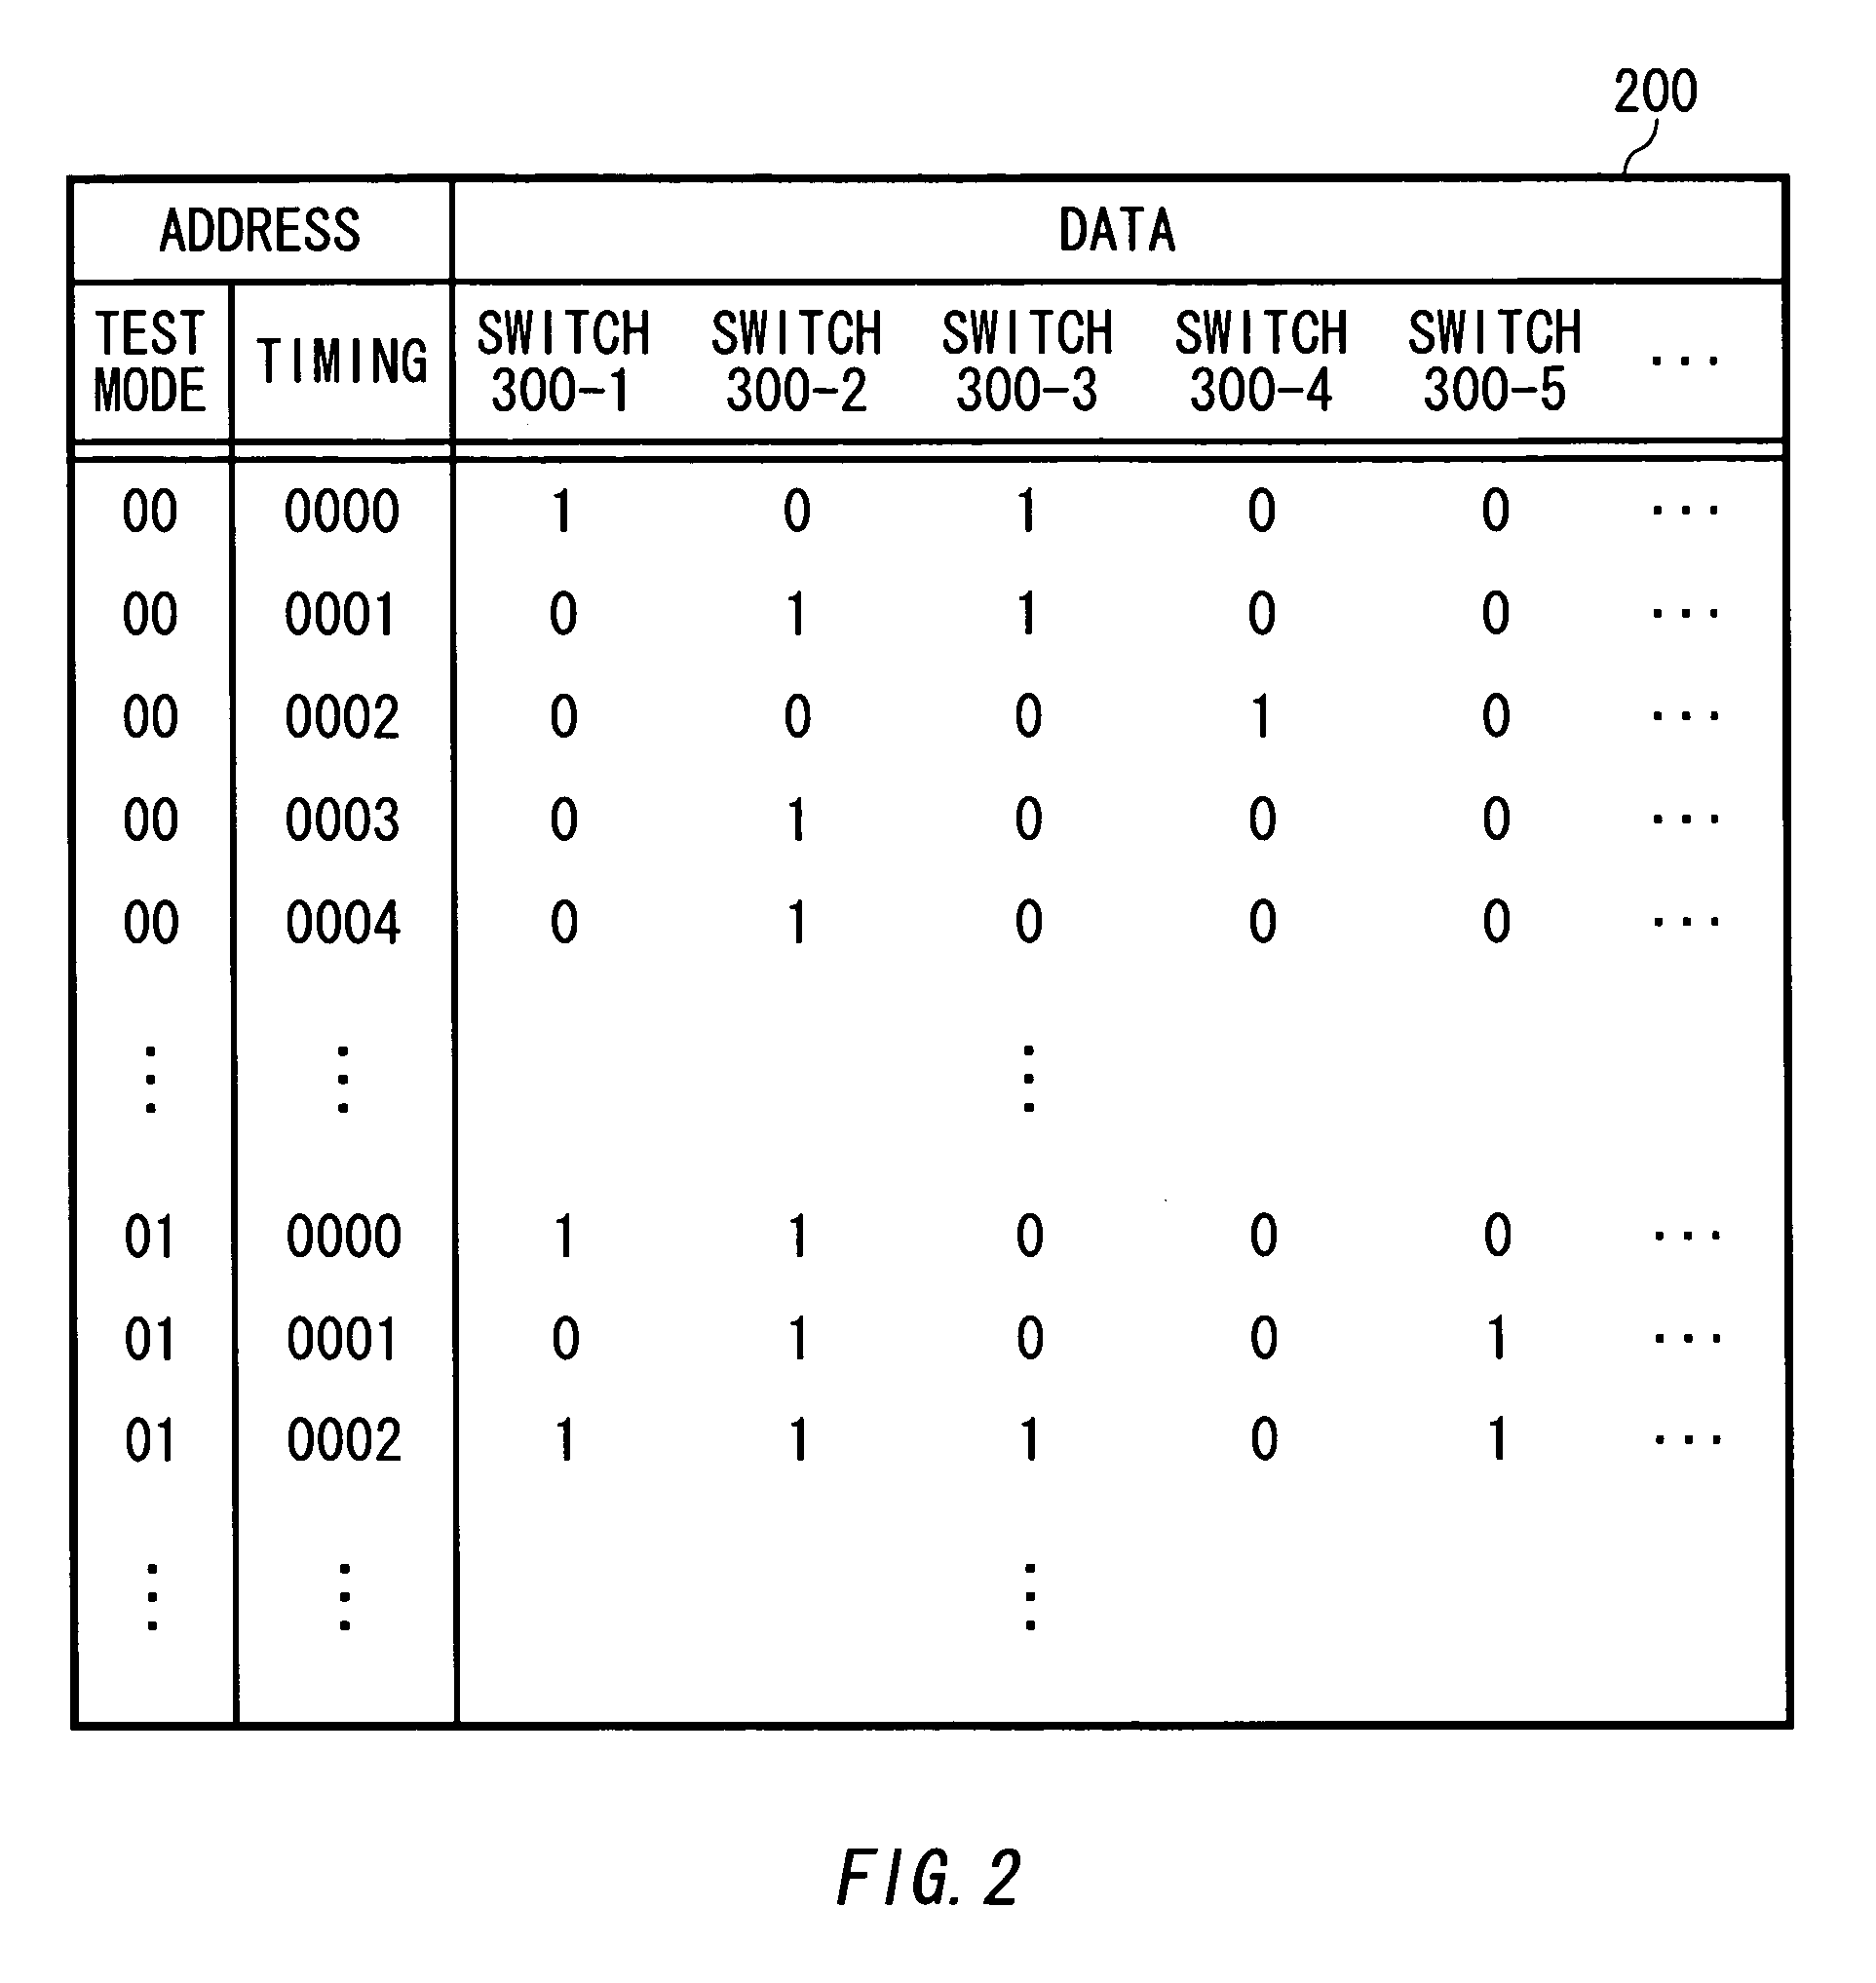 Switch control apparatus, semiconductor device test apparatus and sequence pattern generating program